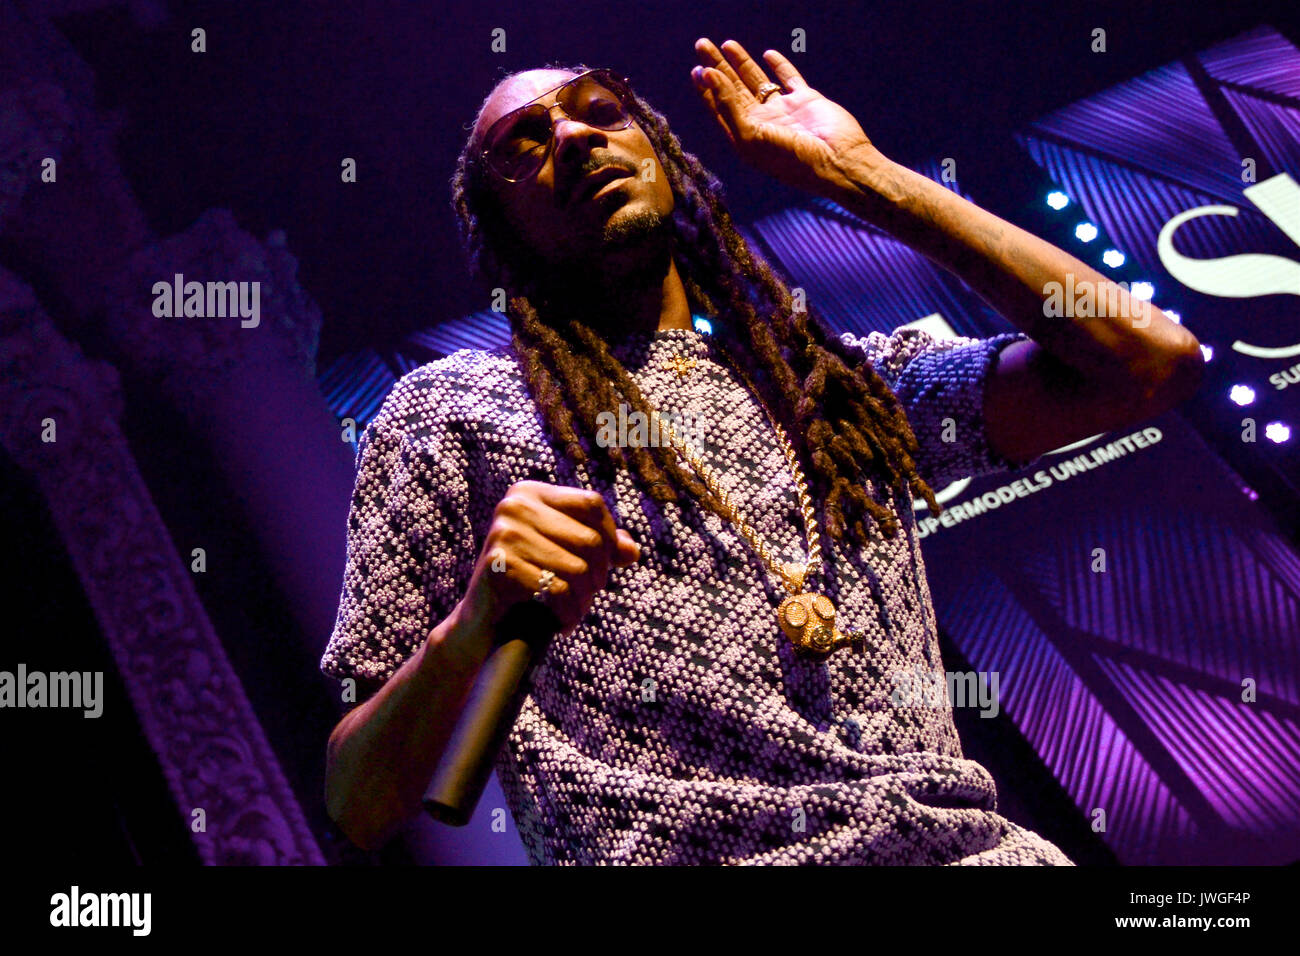 Hiphop artist Snoop Dogg performs onstage SU Magazine's 17th Anniversary Celebration Hollywood,California August 12,2017. Stock Photo